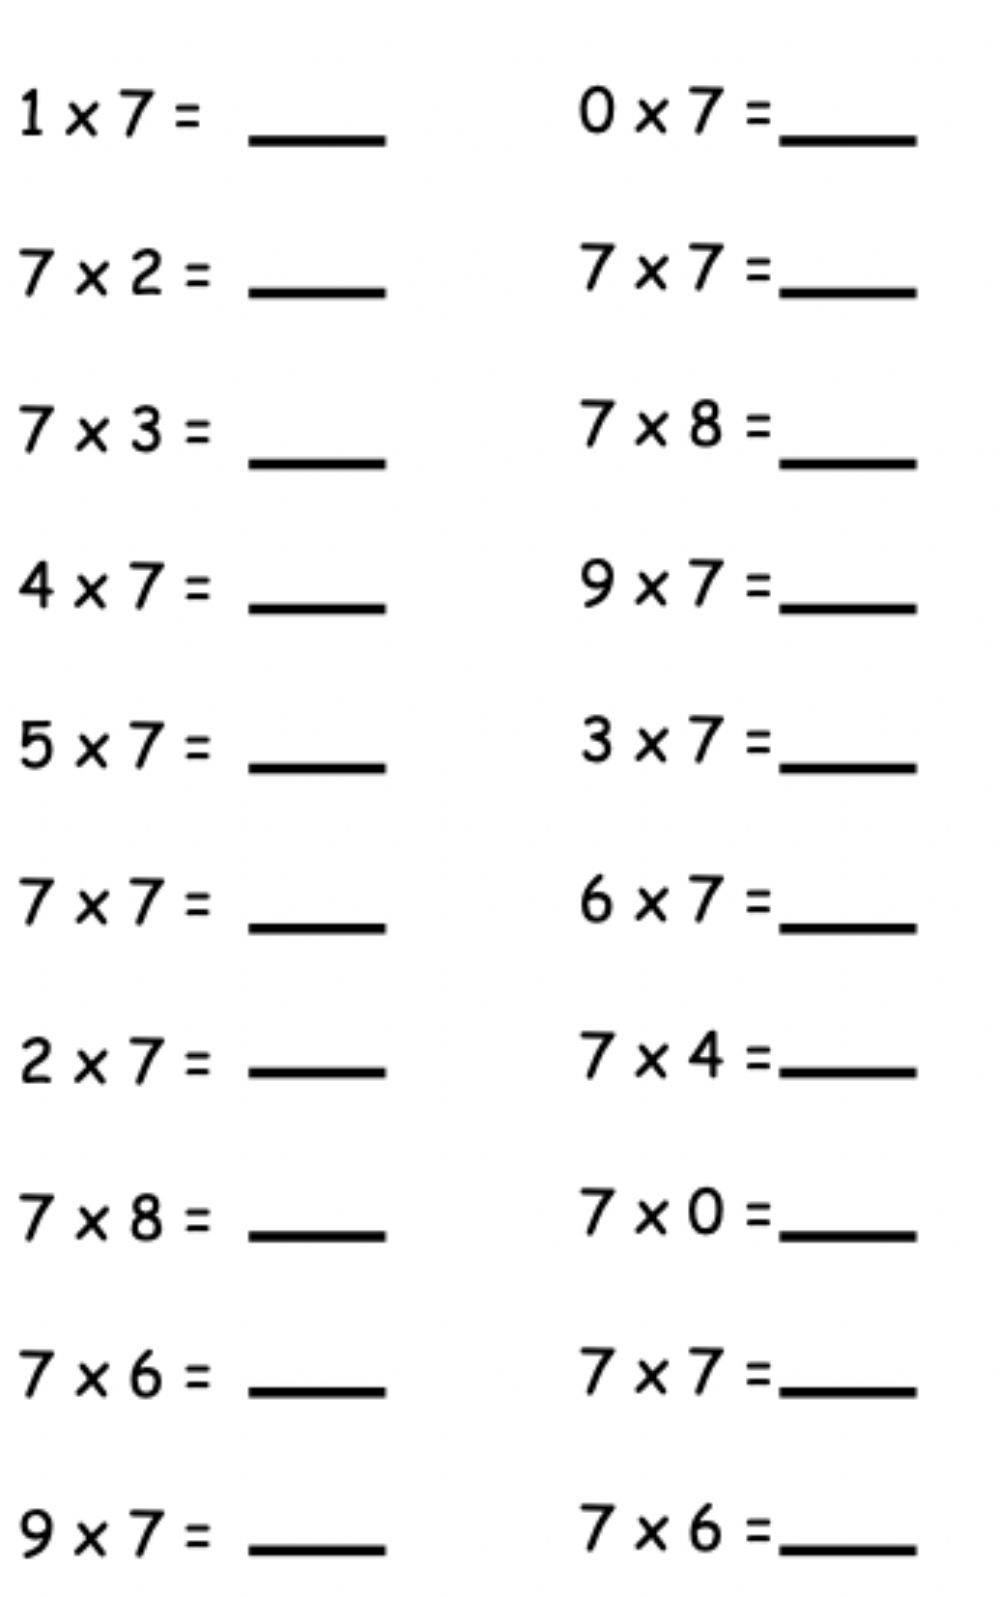 Multiplication Facts Of 7 Worksheets